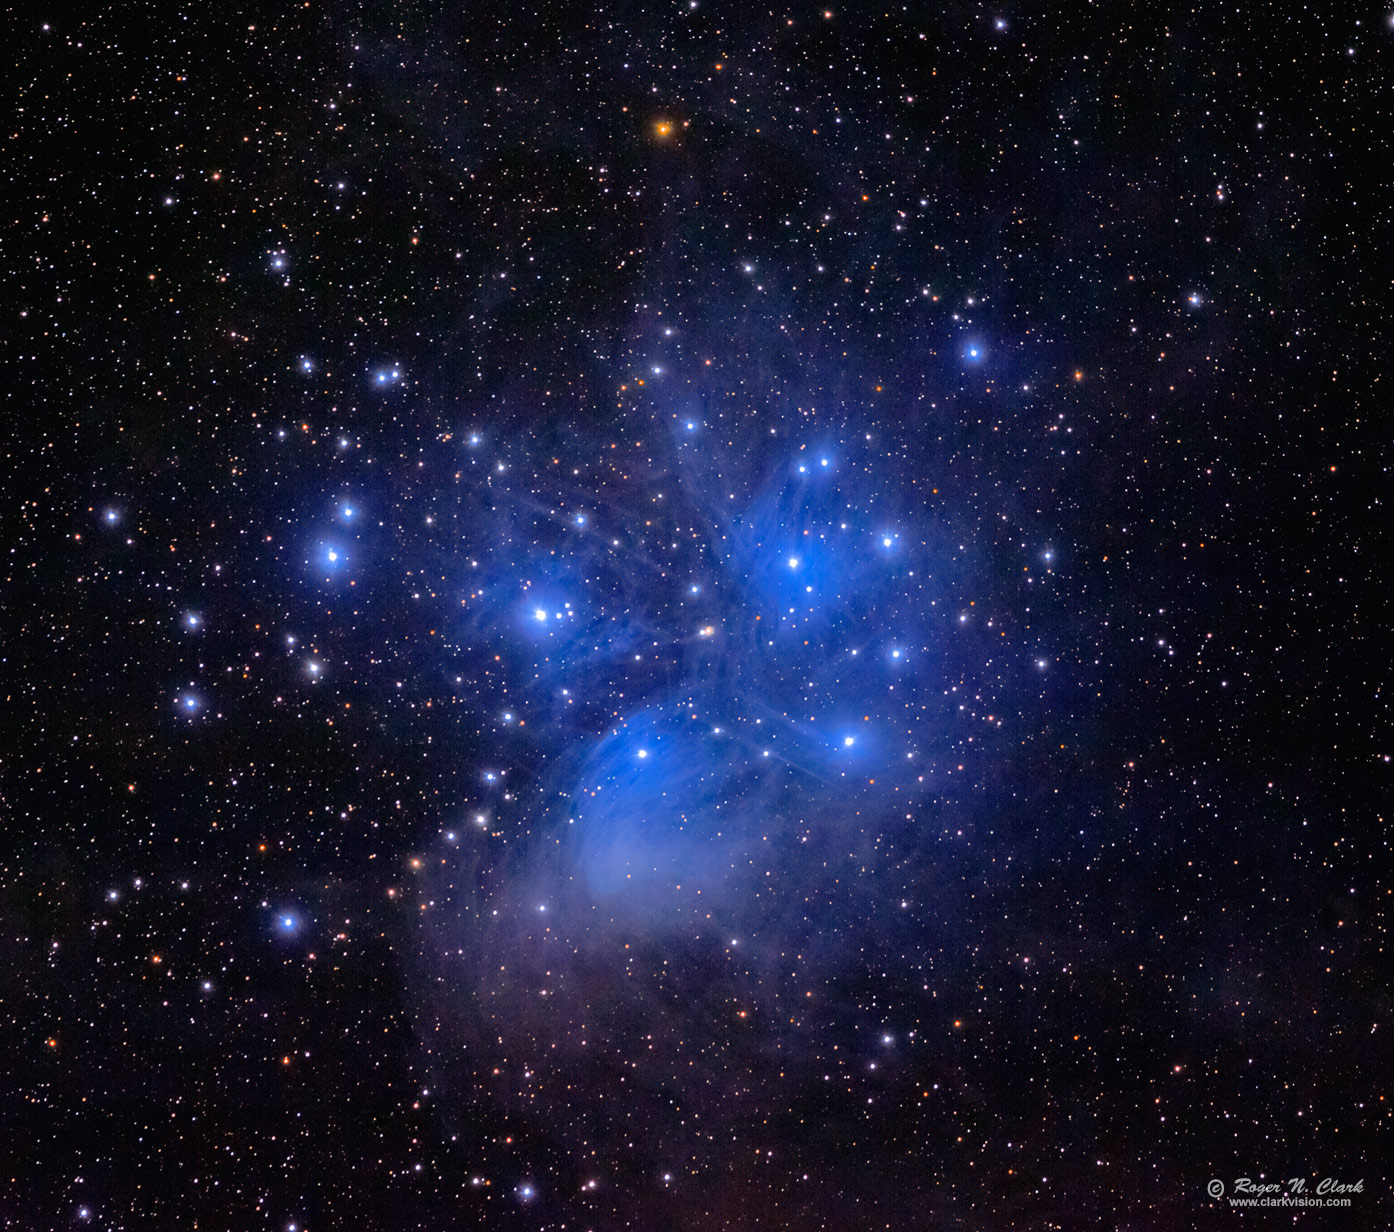 image pleiades.m45.rnclark.c11.21.2014-acr-t20J6A1575-1629-t3b-rs.e-1394vs.jpg is Copyrighted by Roger N. Clark, www.clarkvision.com